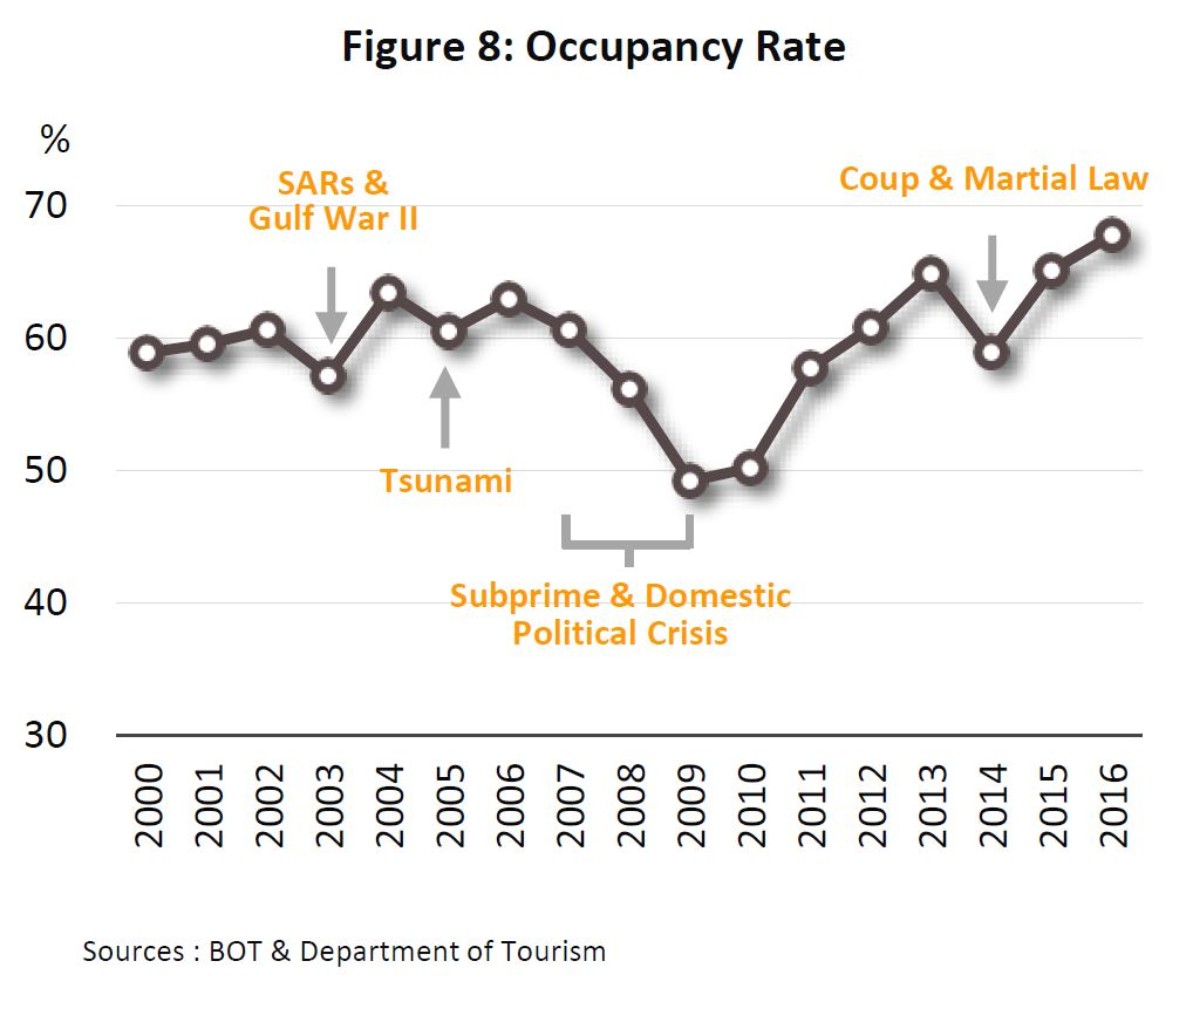 In 2016, the average occupancy rate rose from the previous year’s 65.1% to 67.8% 